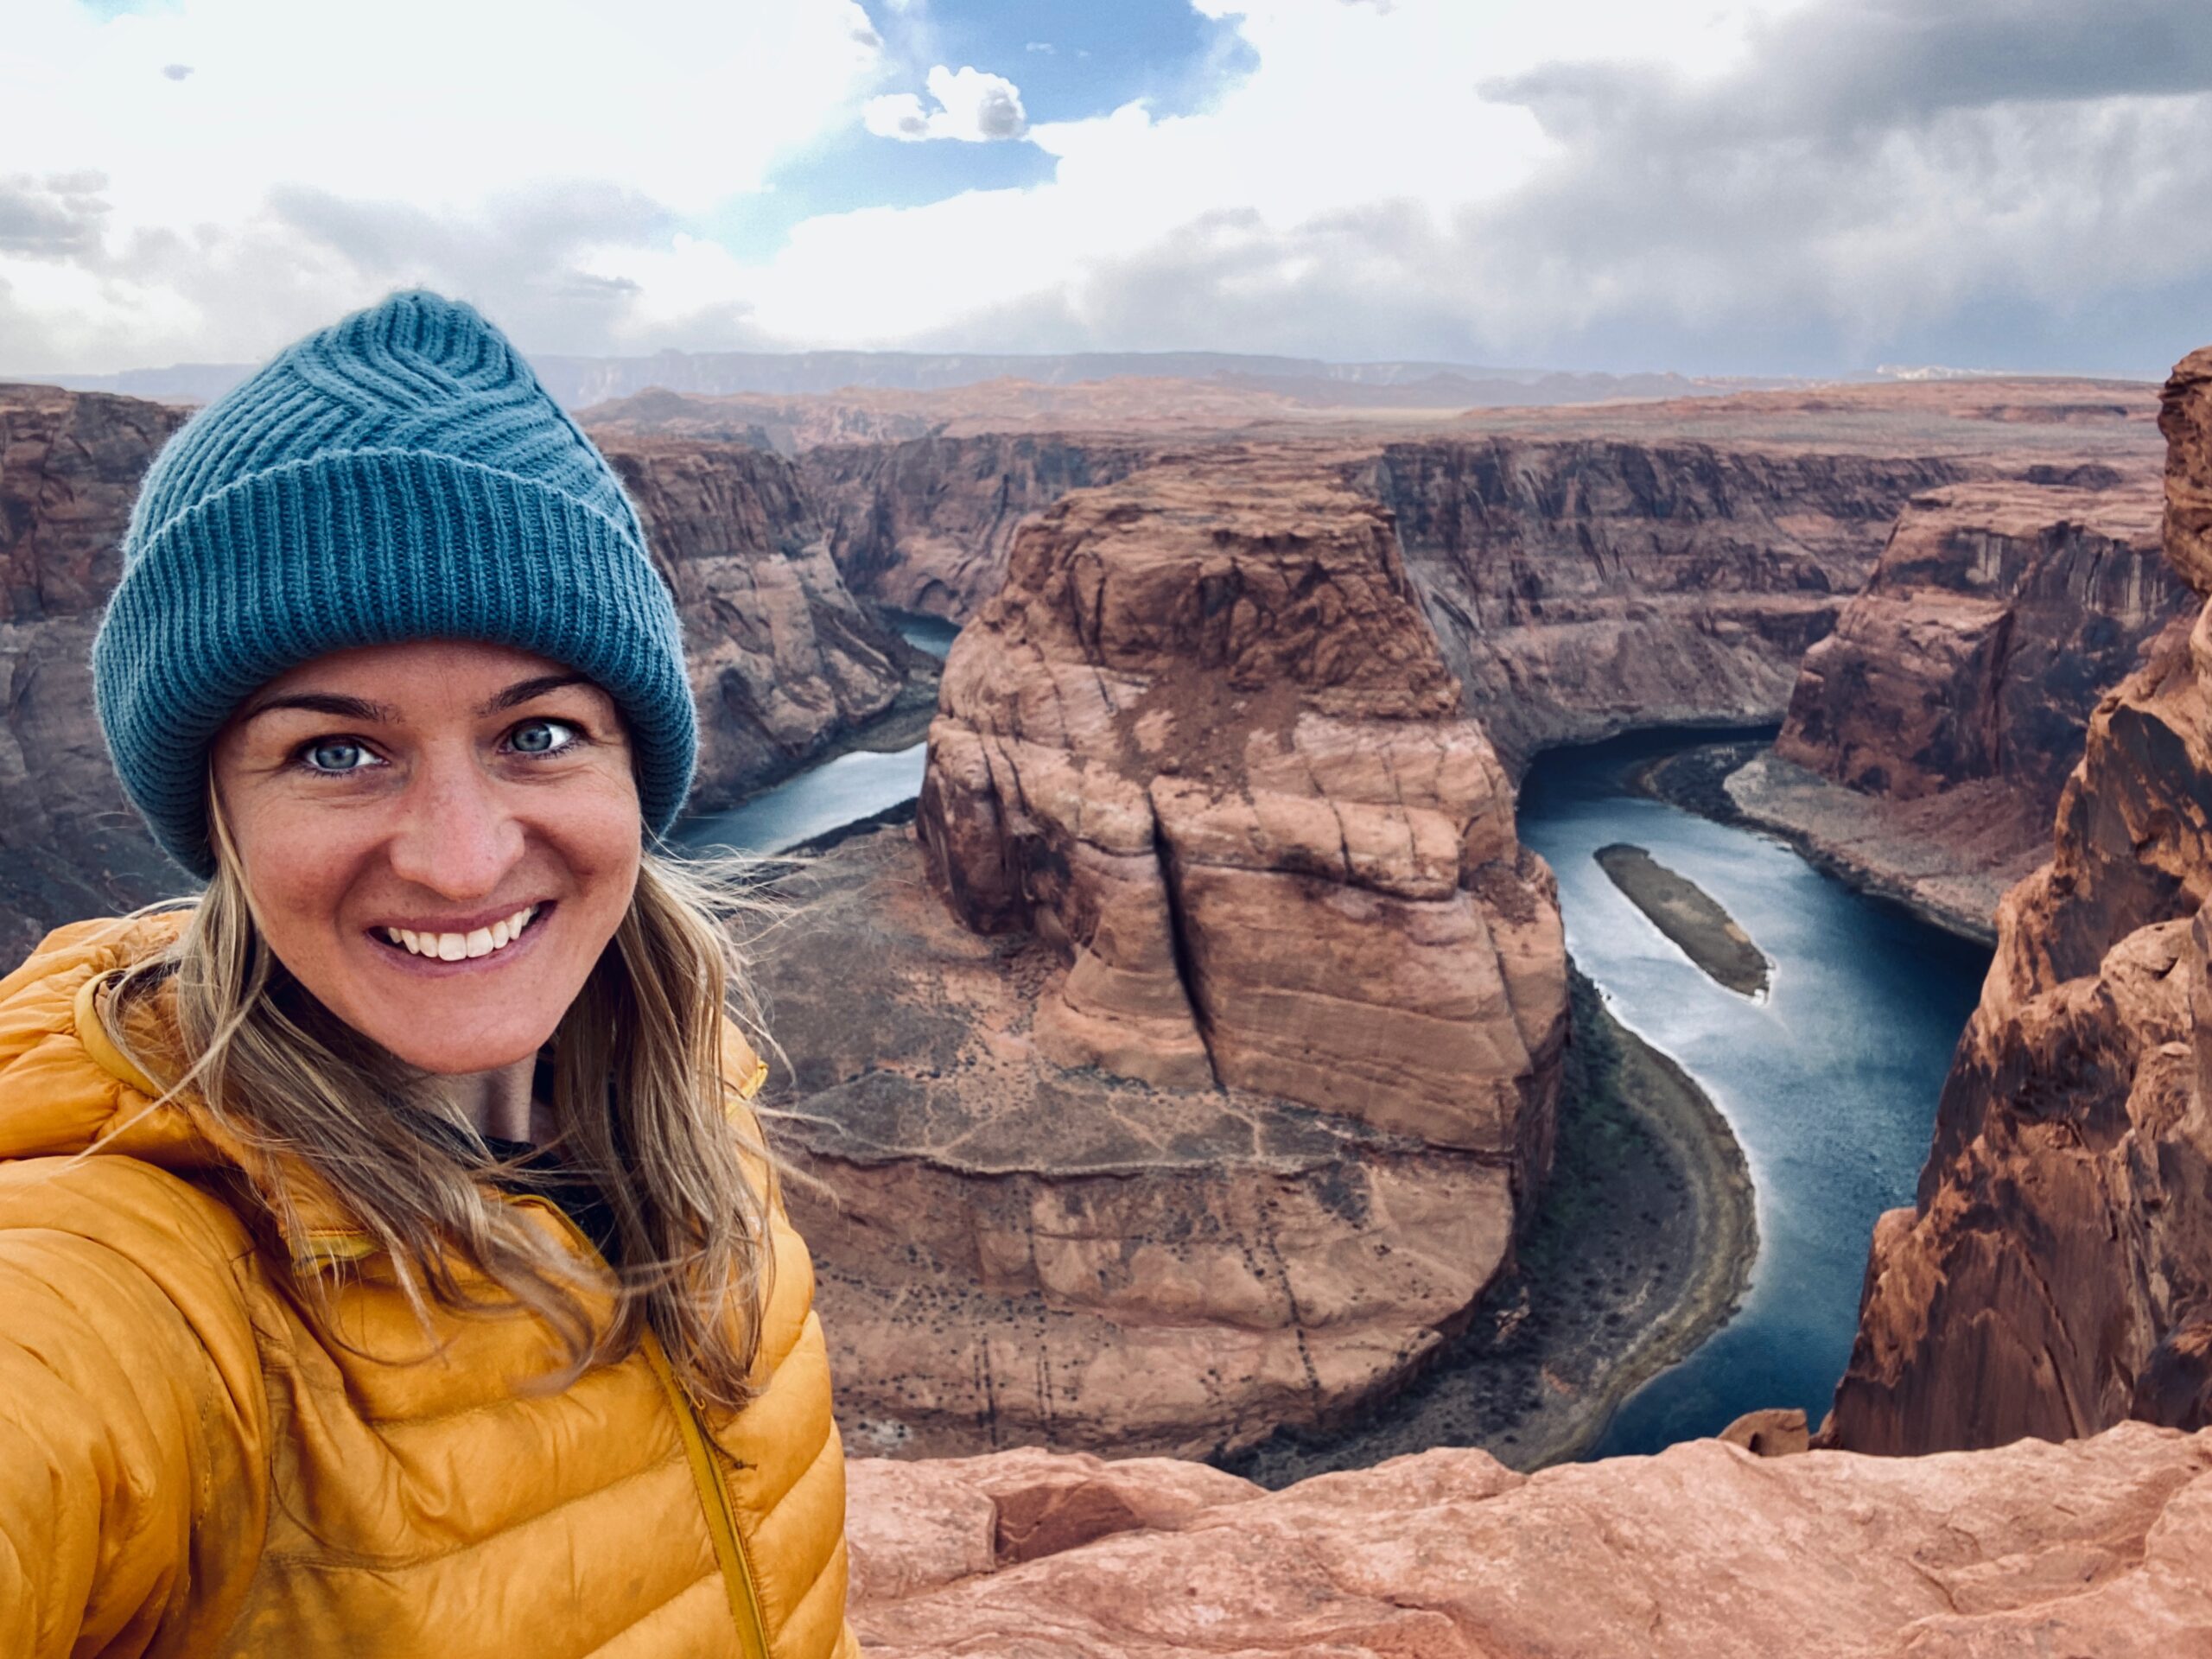 A Cairn Project ambassador smiles for a selfie in front of Horseshoe Bend